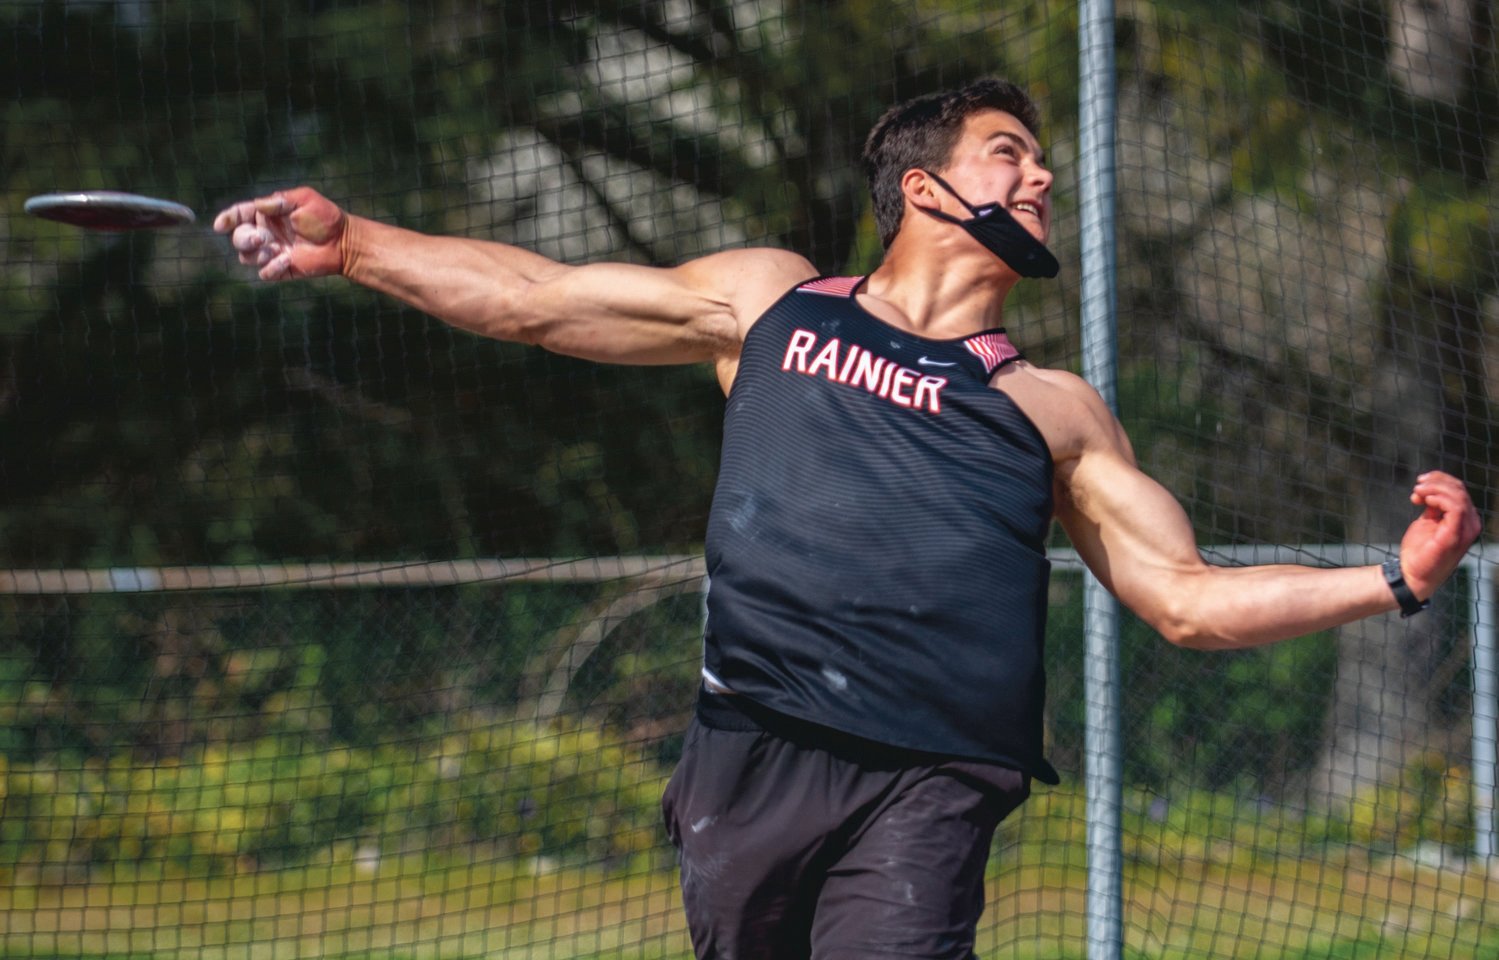 Rainier junior Jeremiah Nubbe broke the Washington state junior discus throw record with a toss of 196 feet even at a meet in Tenino on Monday.